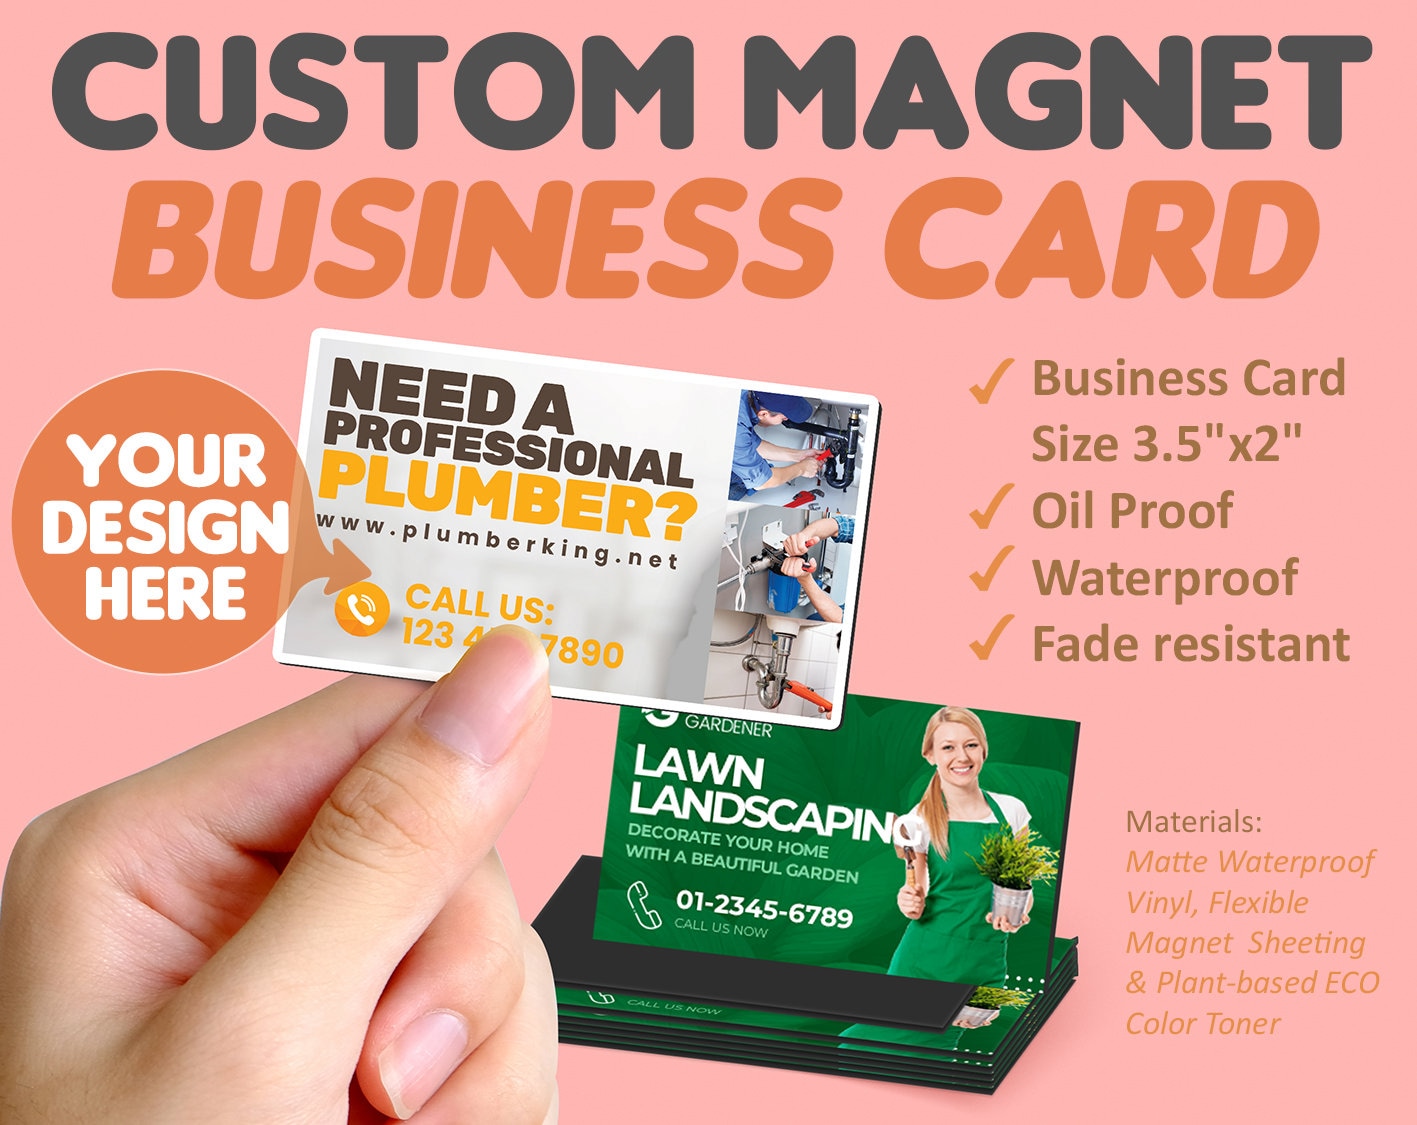 [3.5x2] Peel & Stick Business Card Magnets Adhesive DIY Promotional Pack